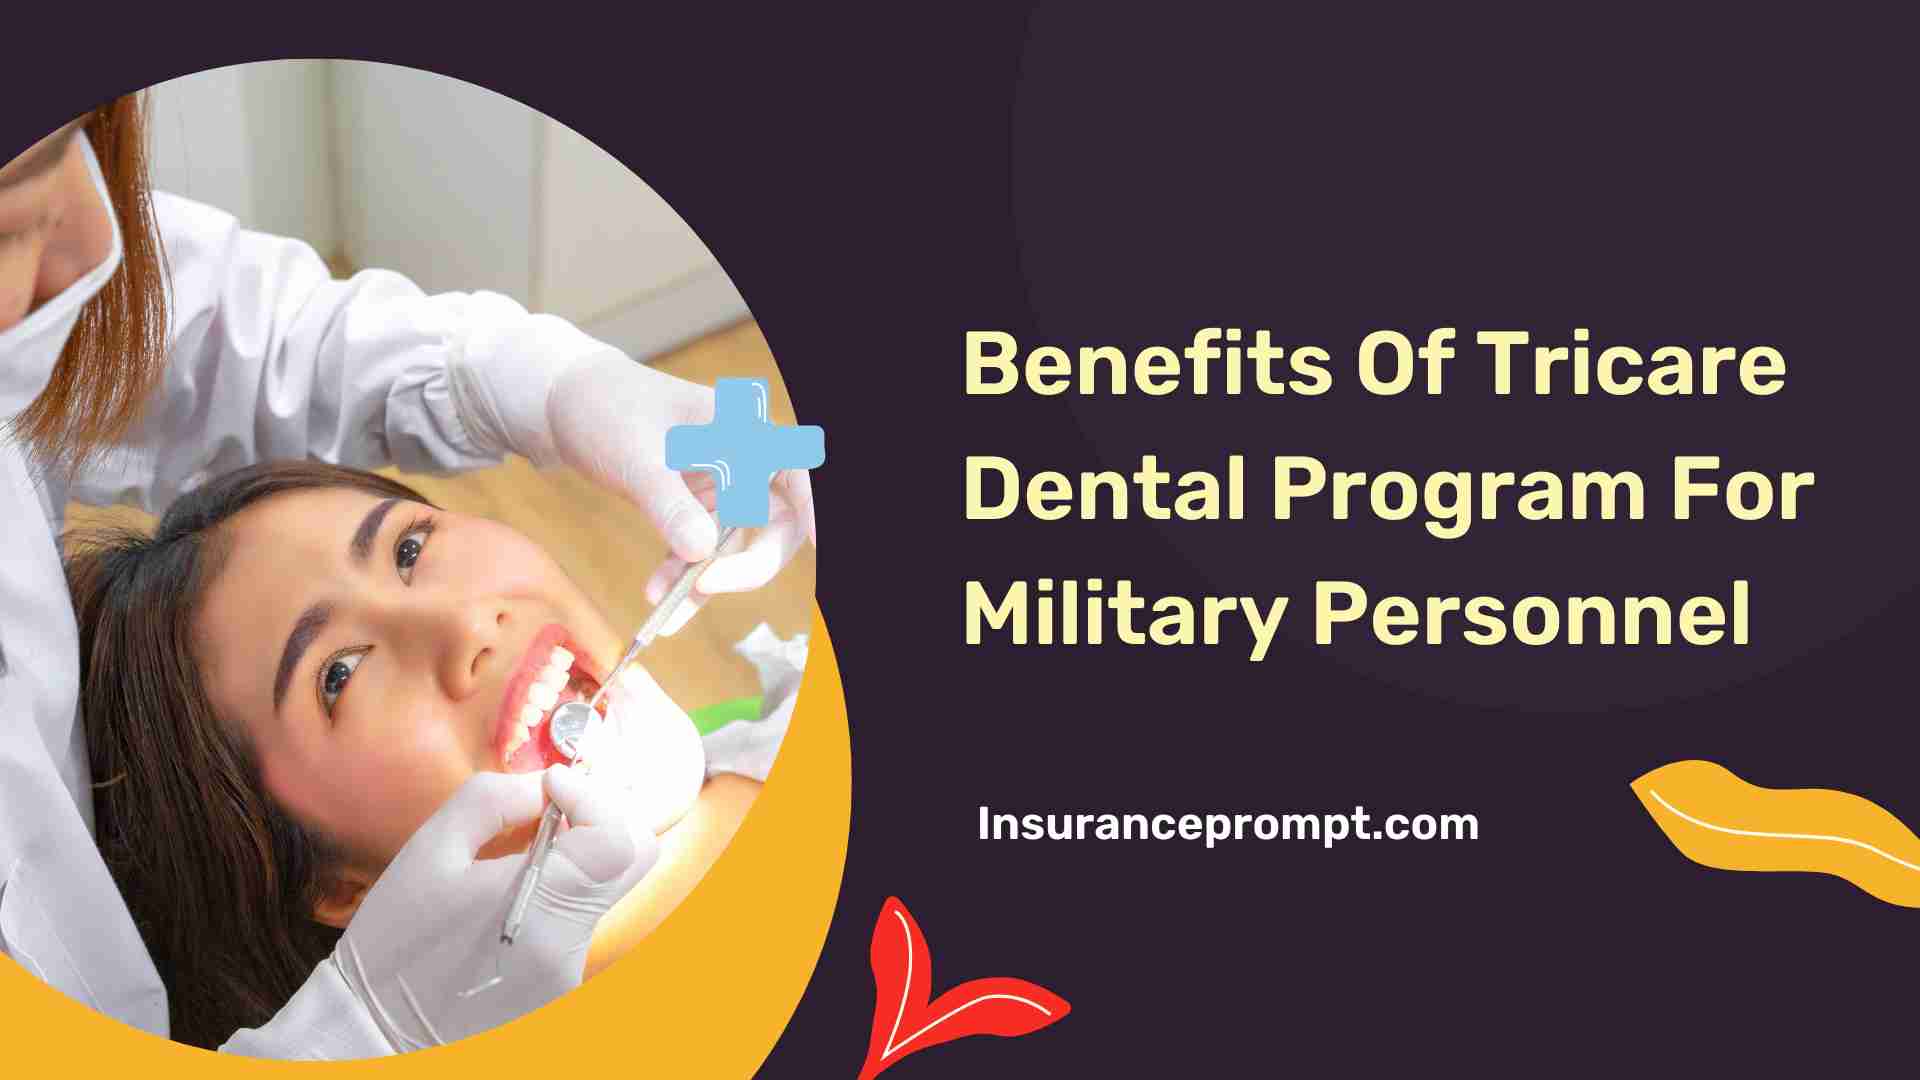 Benefits Of Tricare Dental Program For Military Personnel